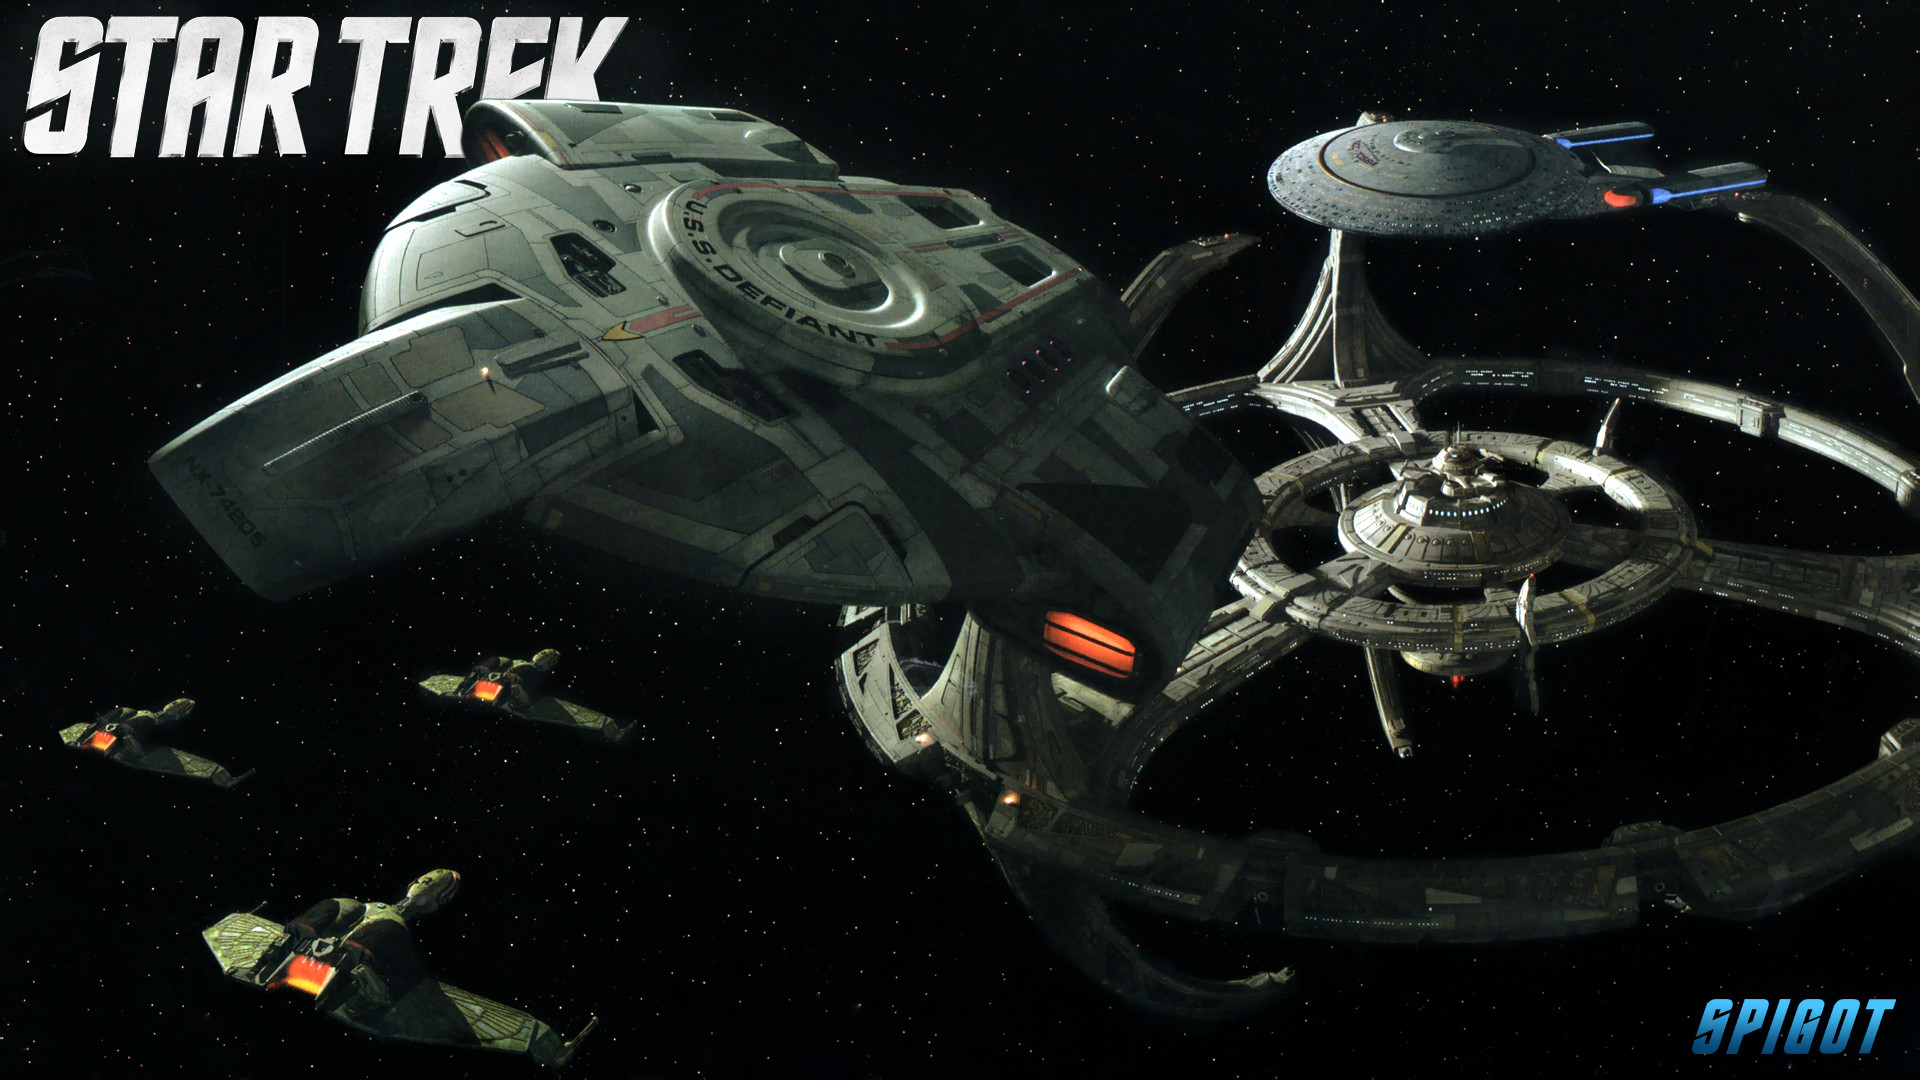 1920x1080 Star Trek Ships Wallpapers. June 8, 2012. Here are some of the ...